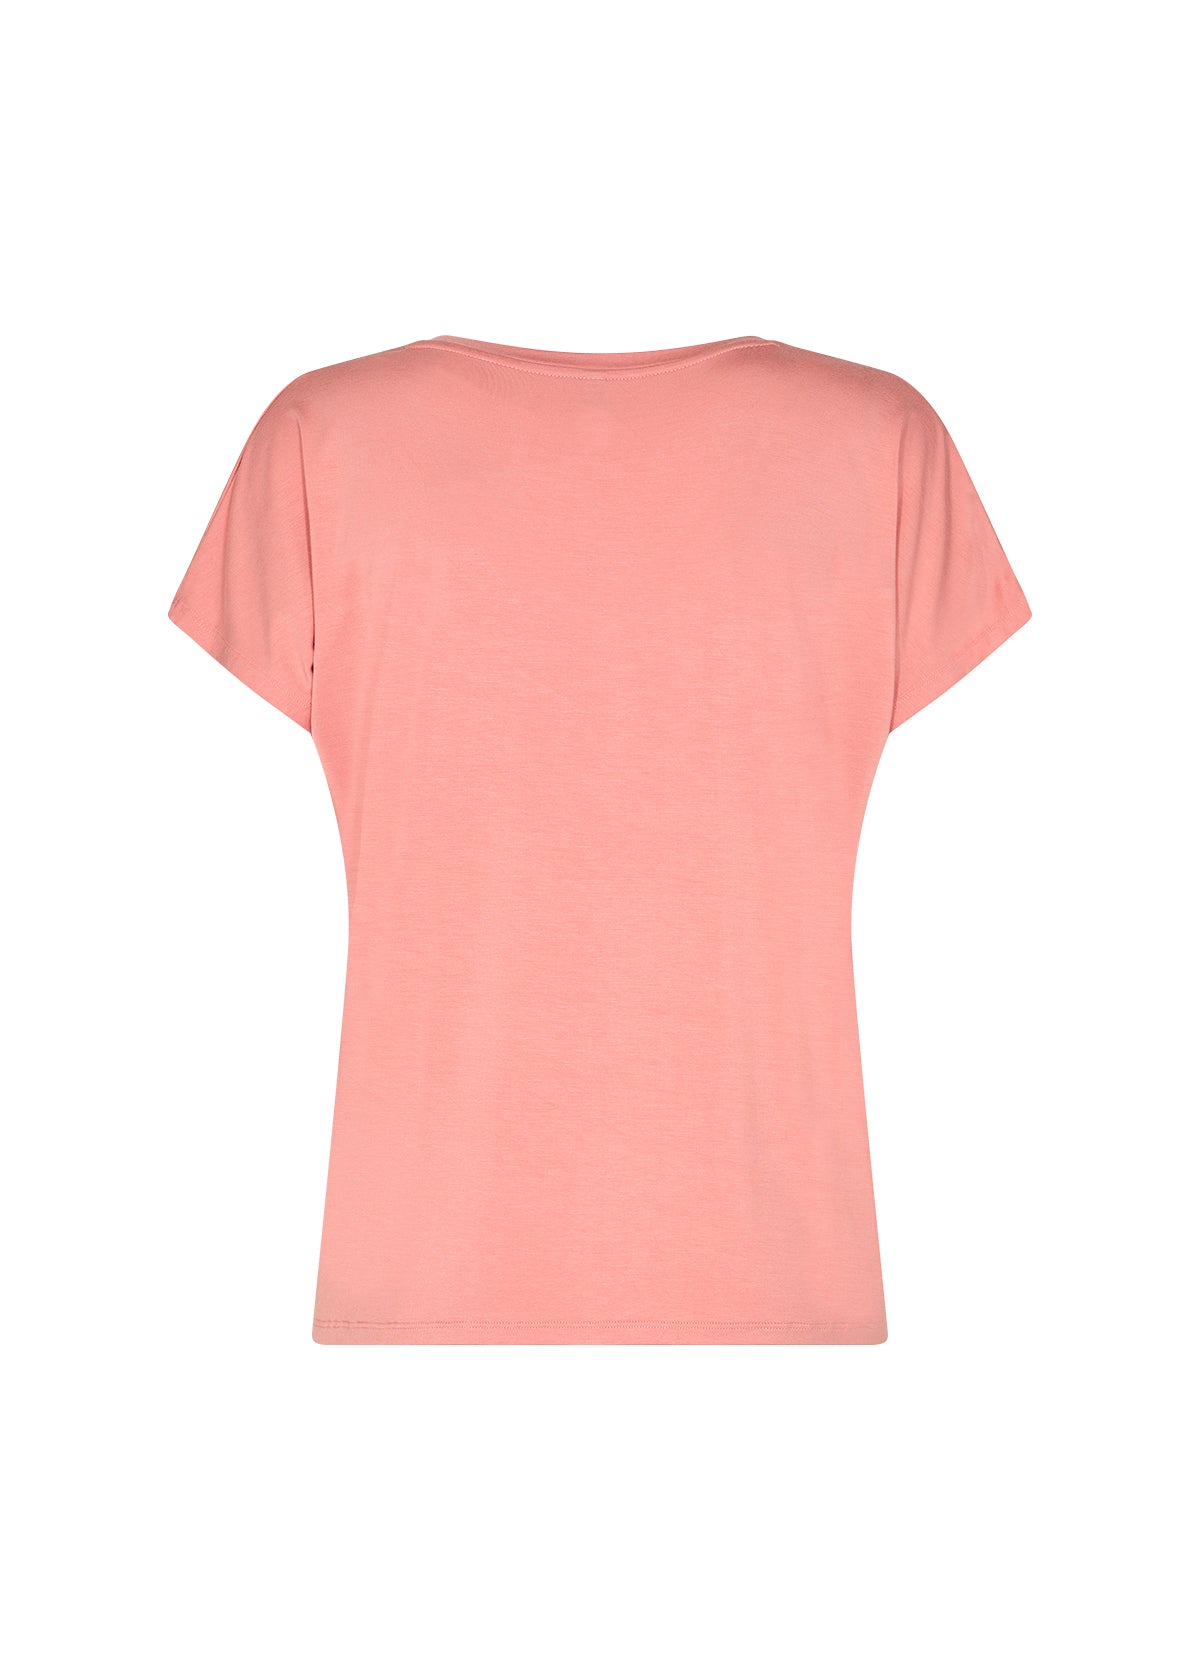 The Marcia Tee in Coral